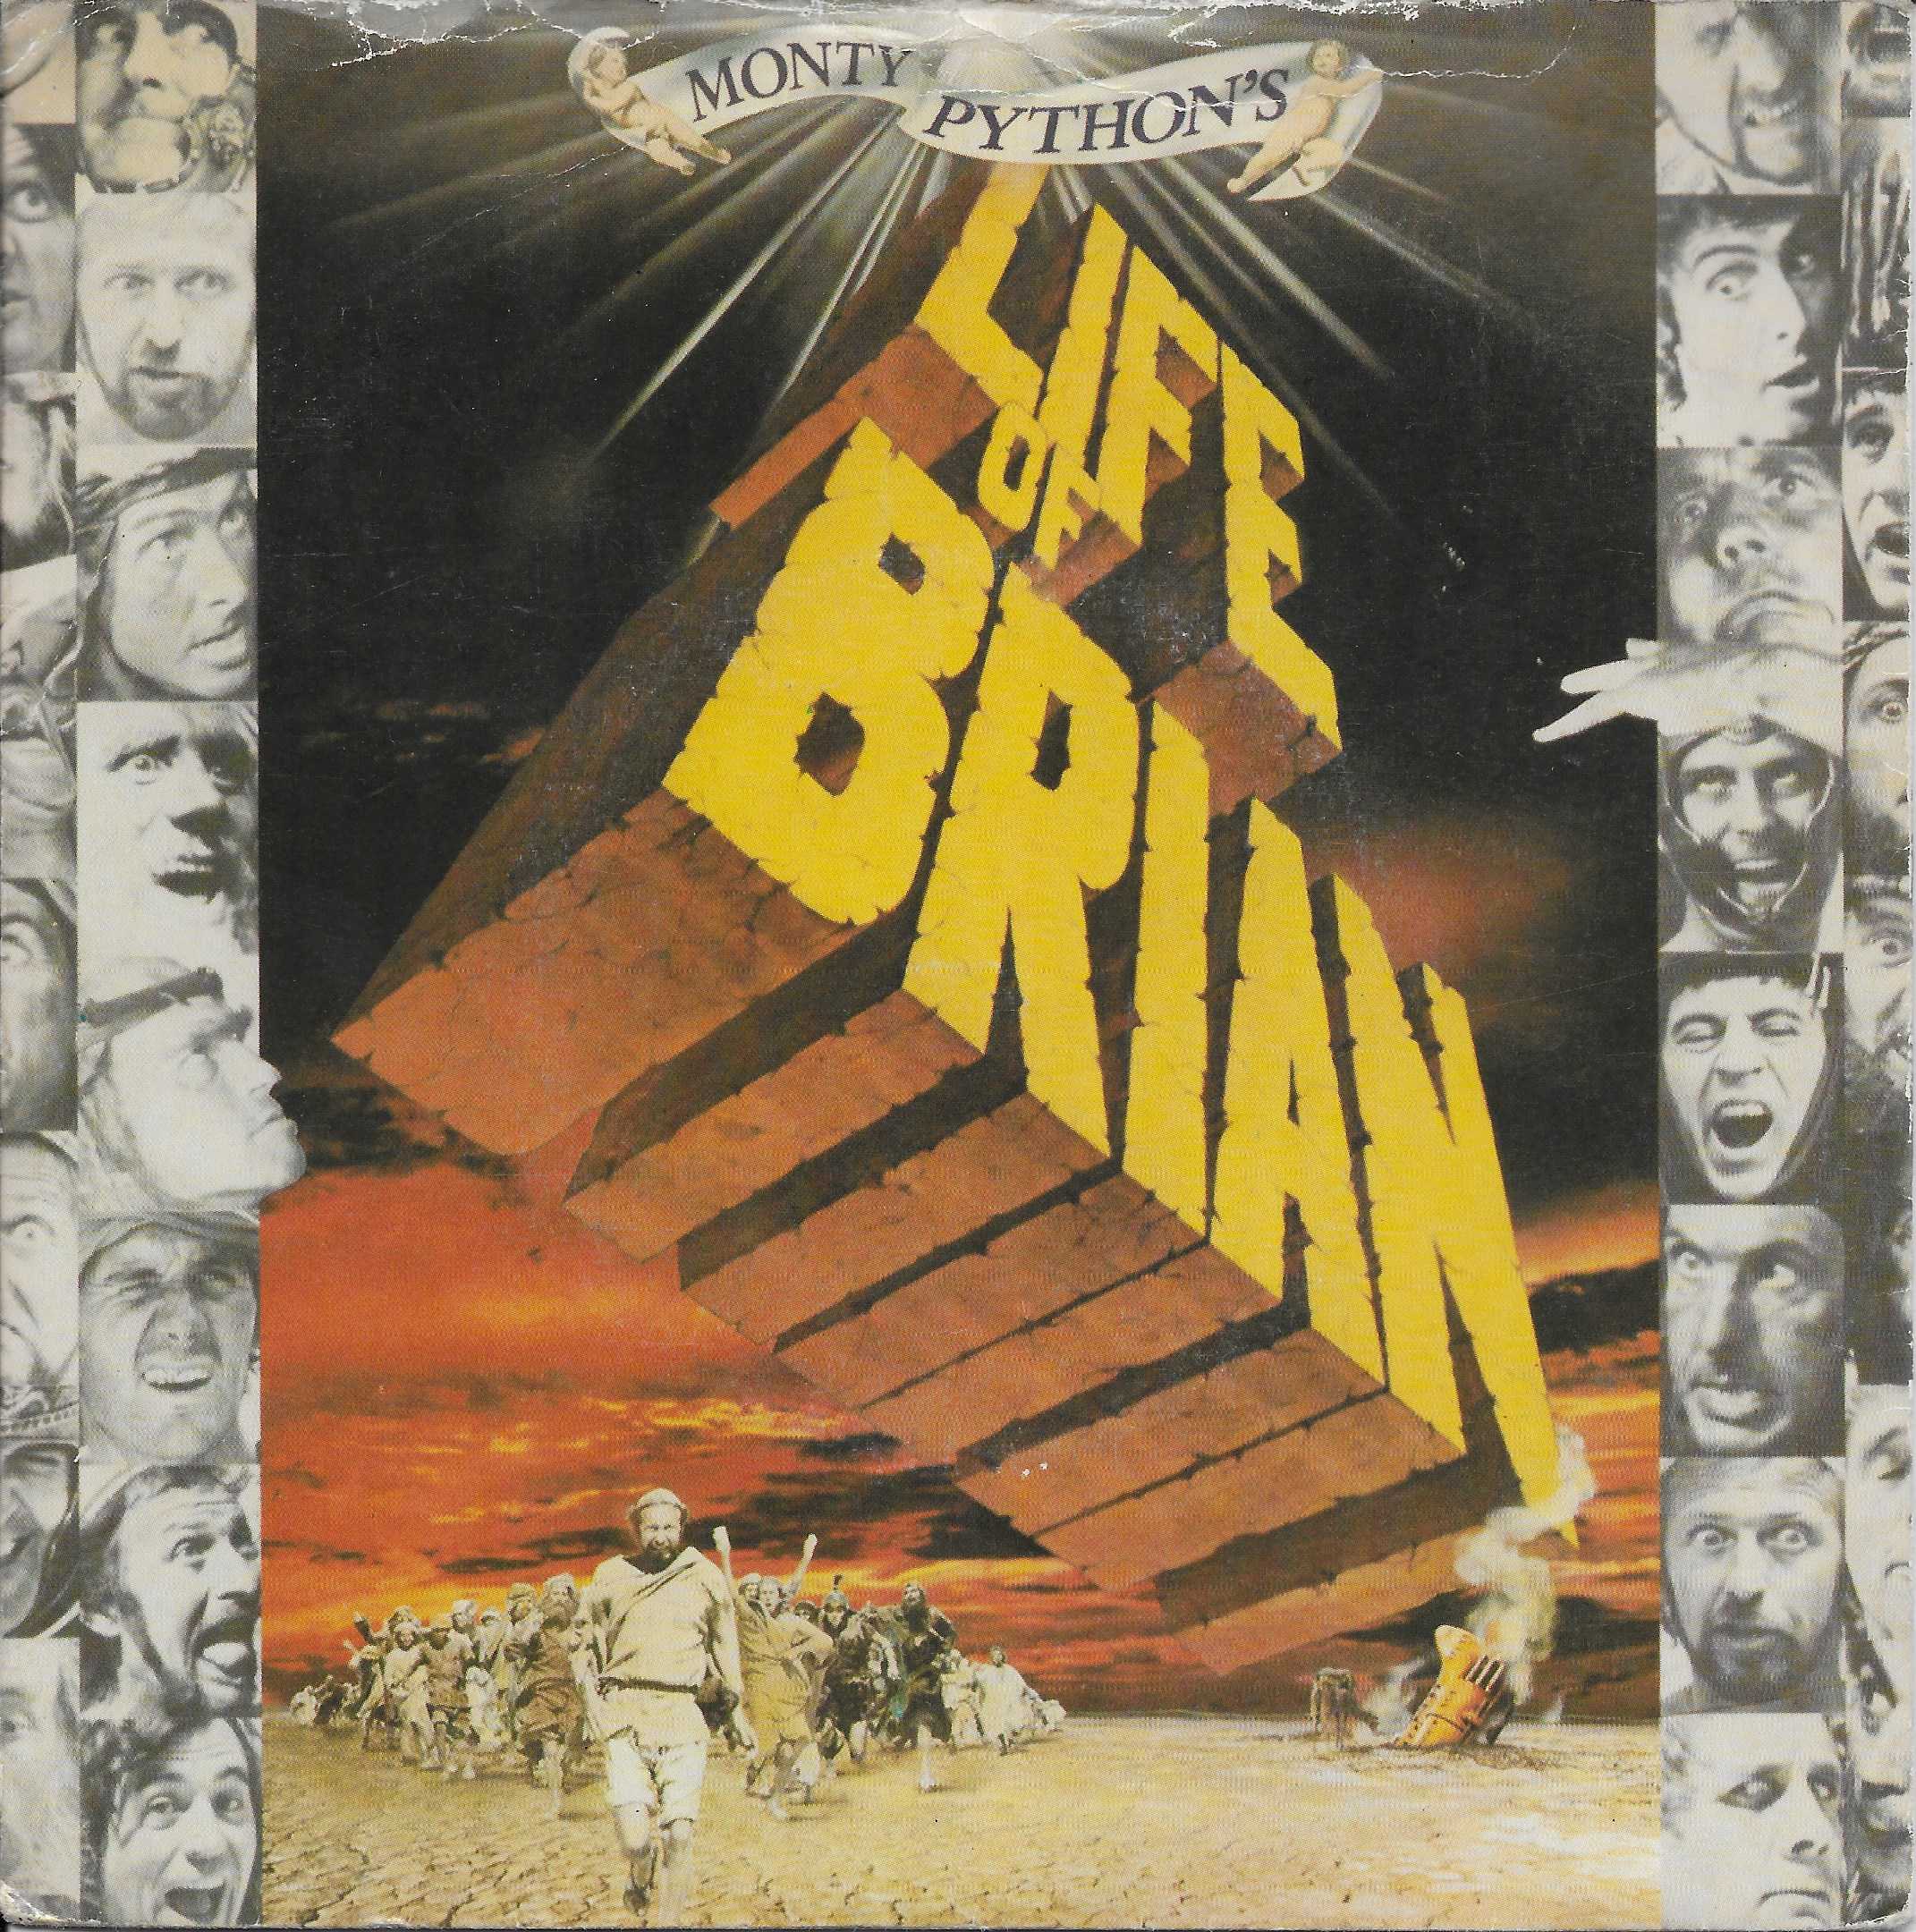 Picture of Brian (Monty Python's flying circus) by artist Monty Python from the BBC singles - Records and Tapes library